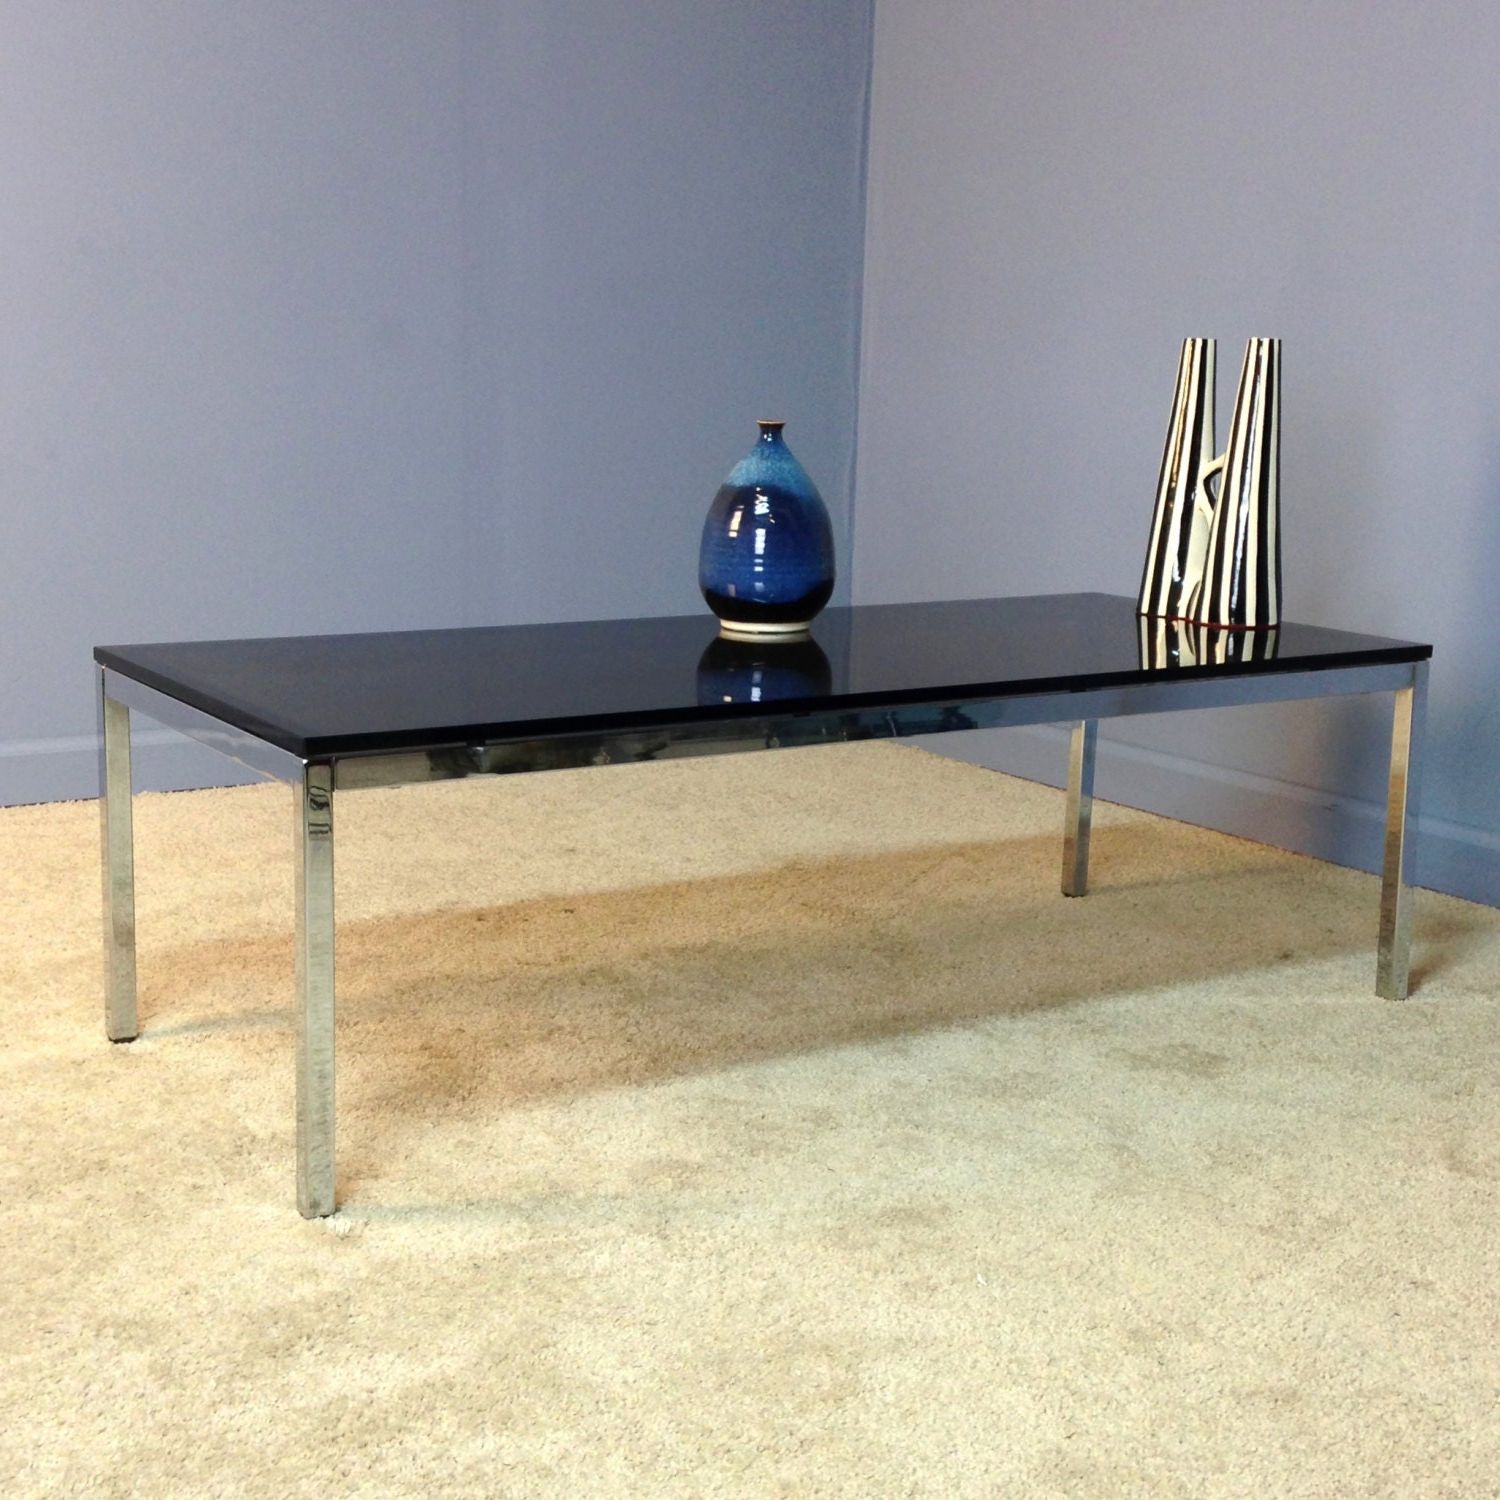 Steelcase Chrome Glass Coffee Table Vintage Mid Century For Recent Chrome And Glass Modern Coffee Tables (View 5 of 20)